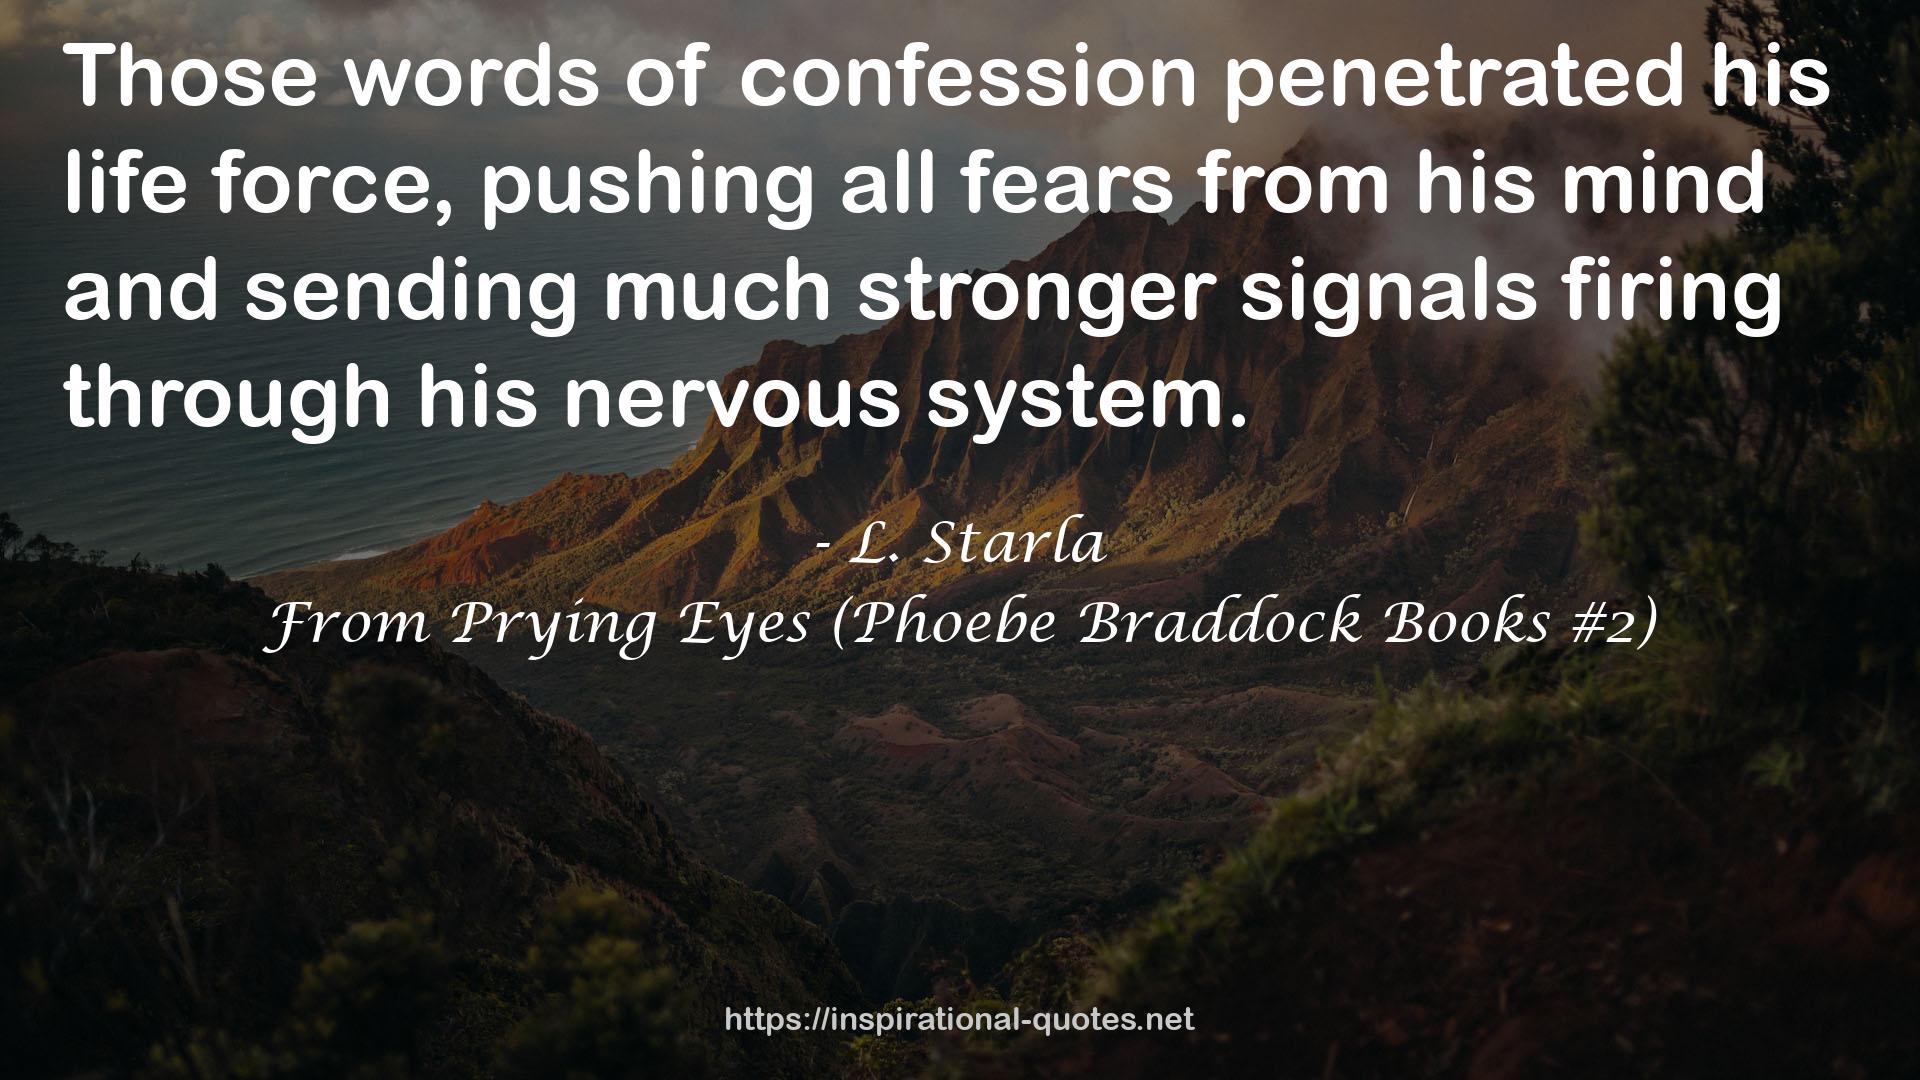 From Prying Eyes (Phoebe Braddock Books #2) QUOTES